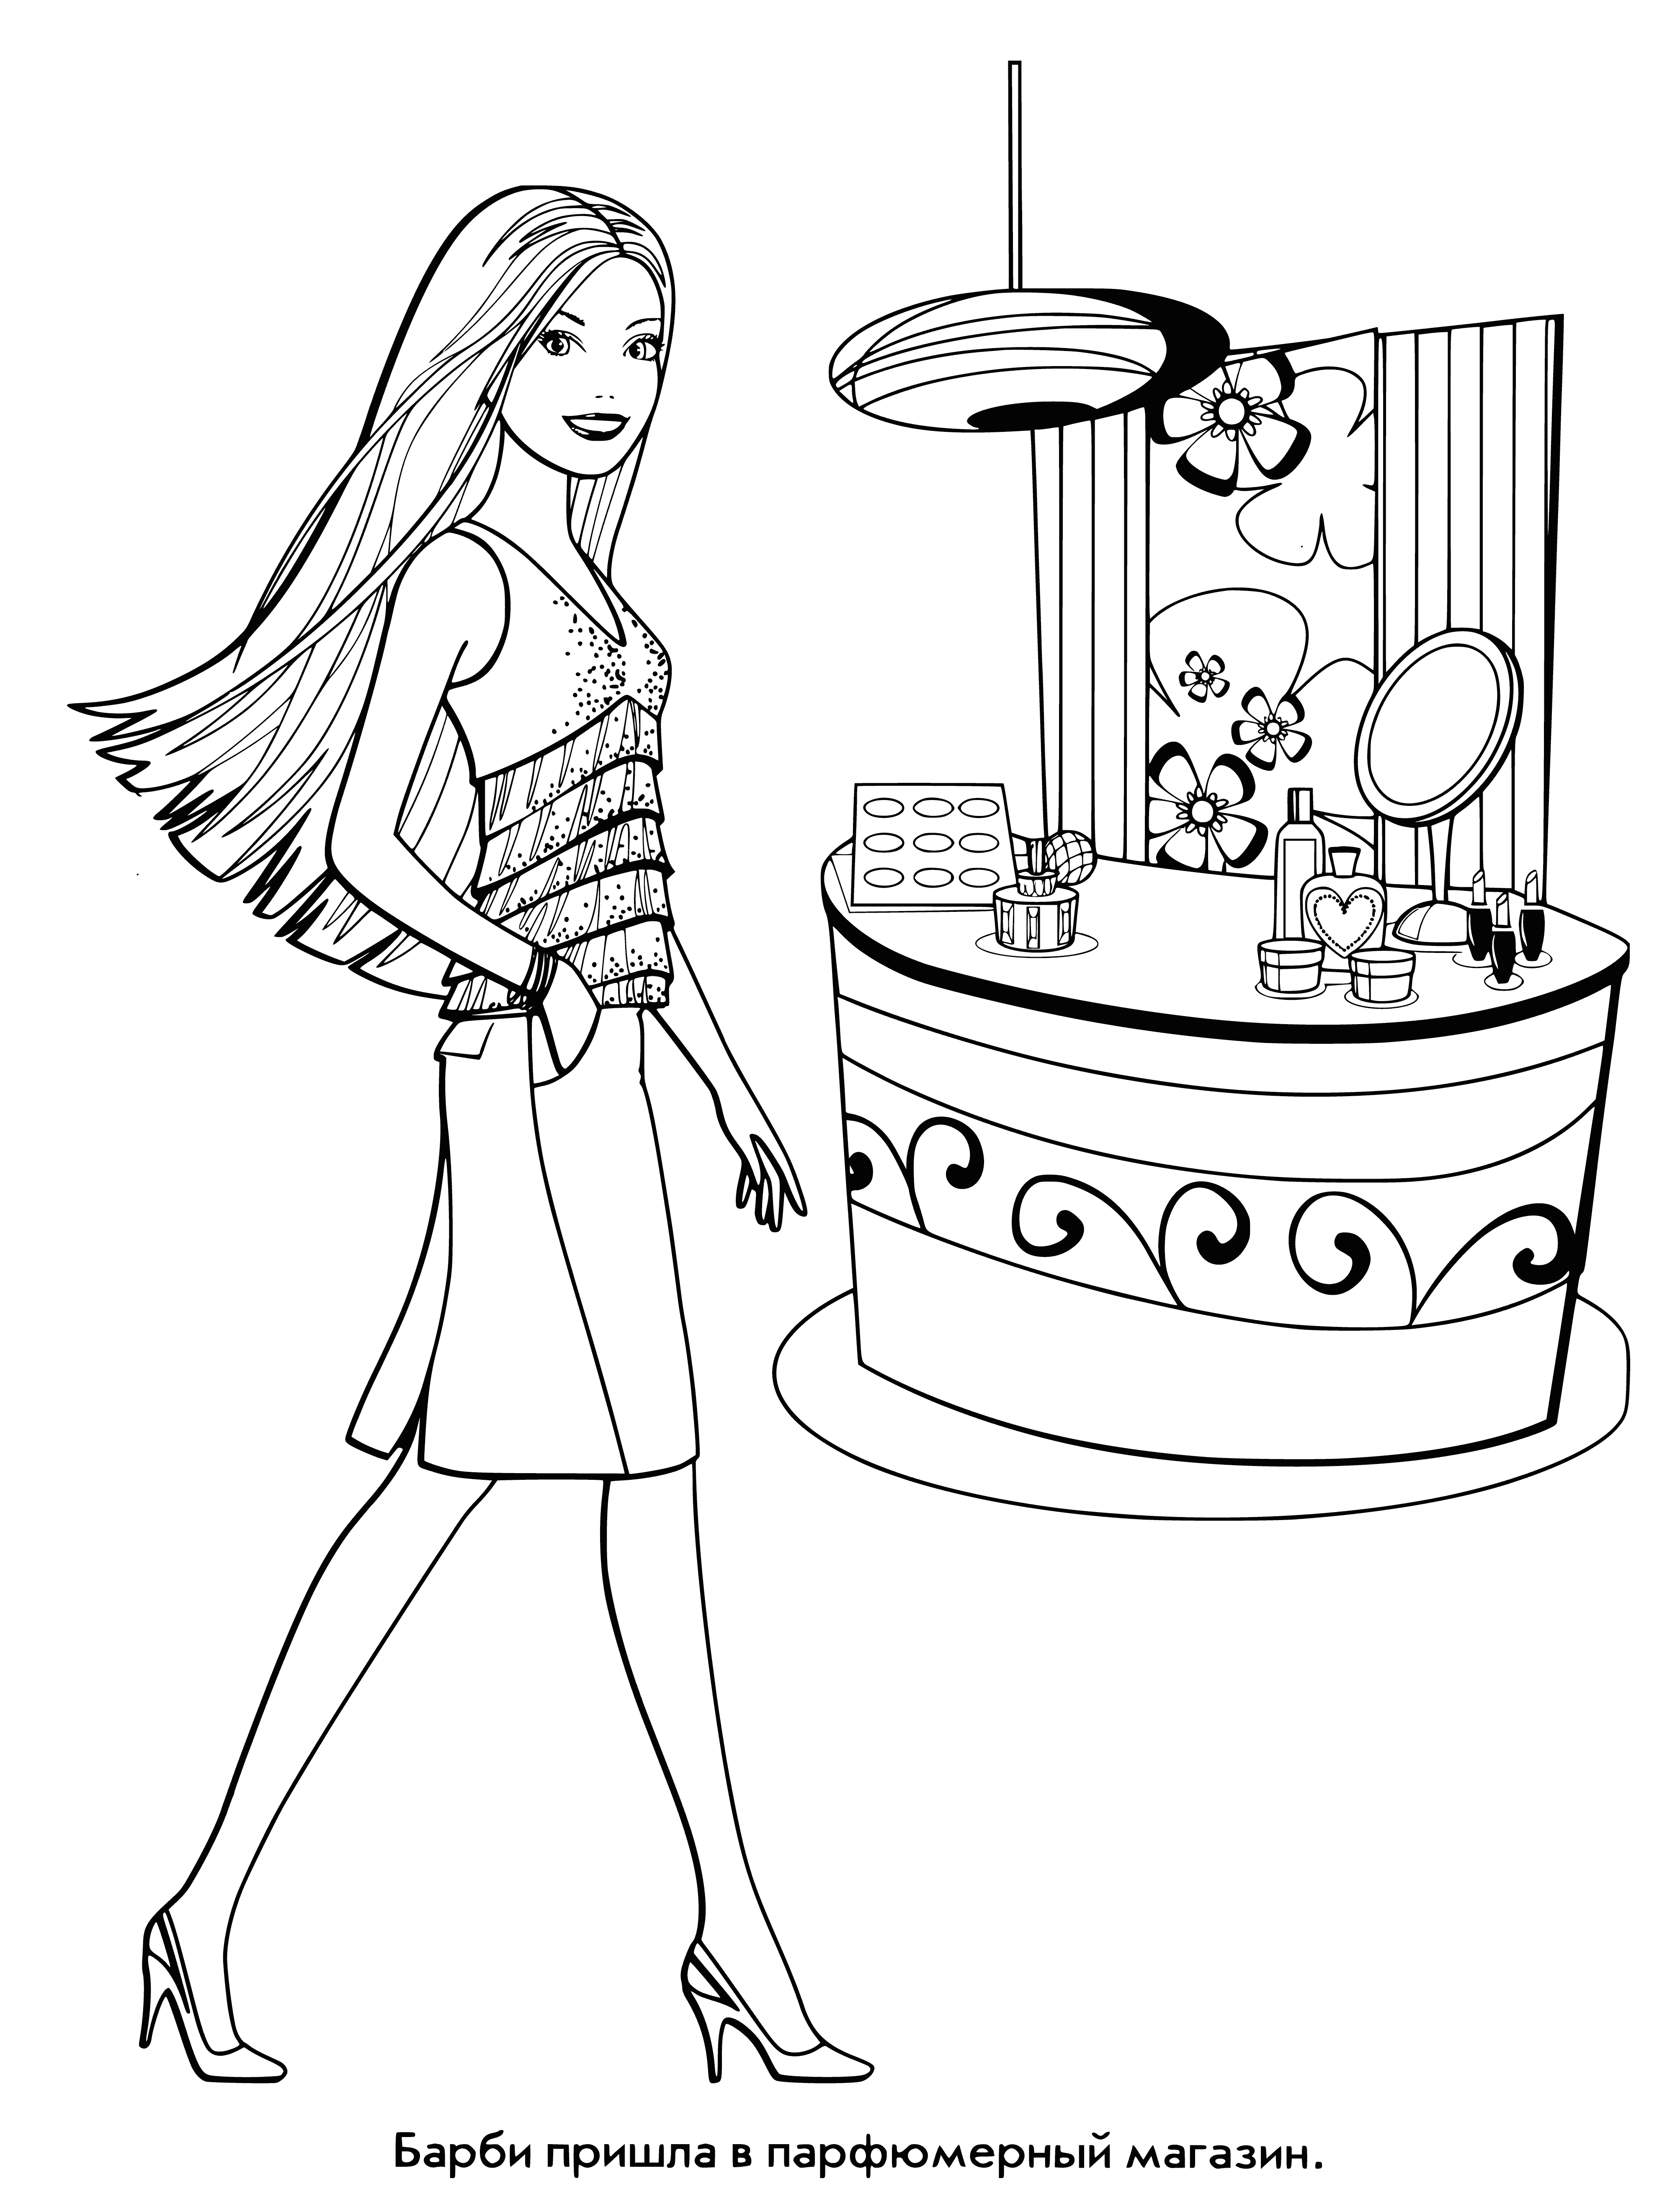 coloring page: She tries on 'Barbie in a Perfume Shop', a pink rose-scented fragrance. #PerfumeShop #Fragrance